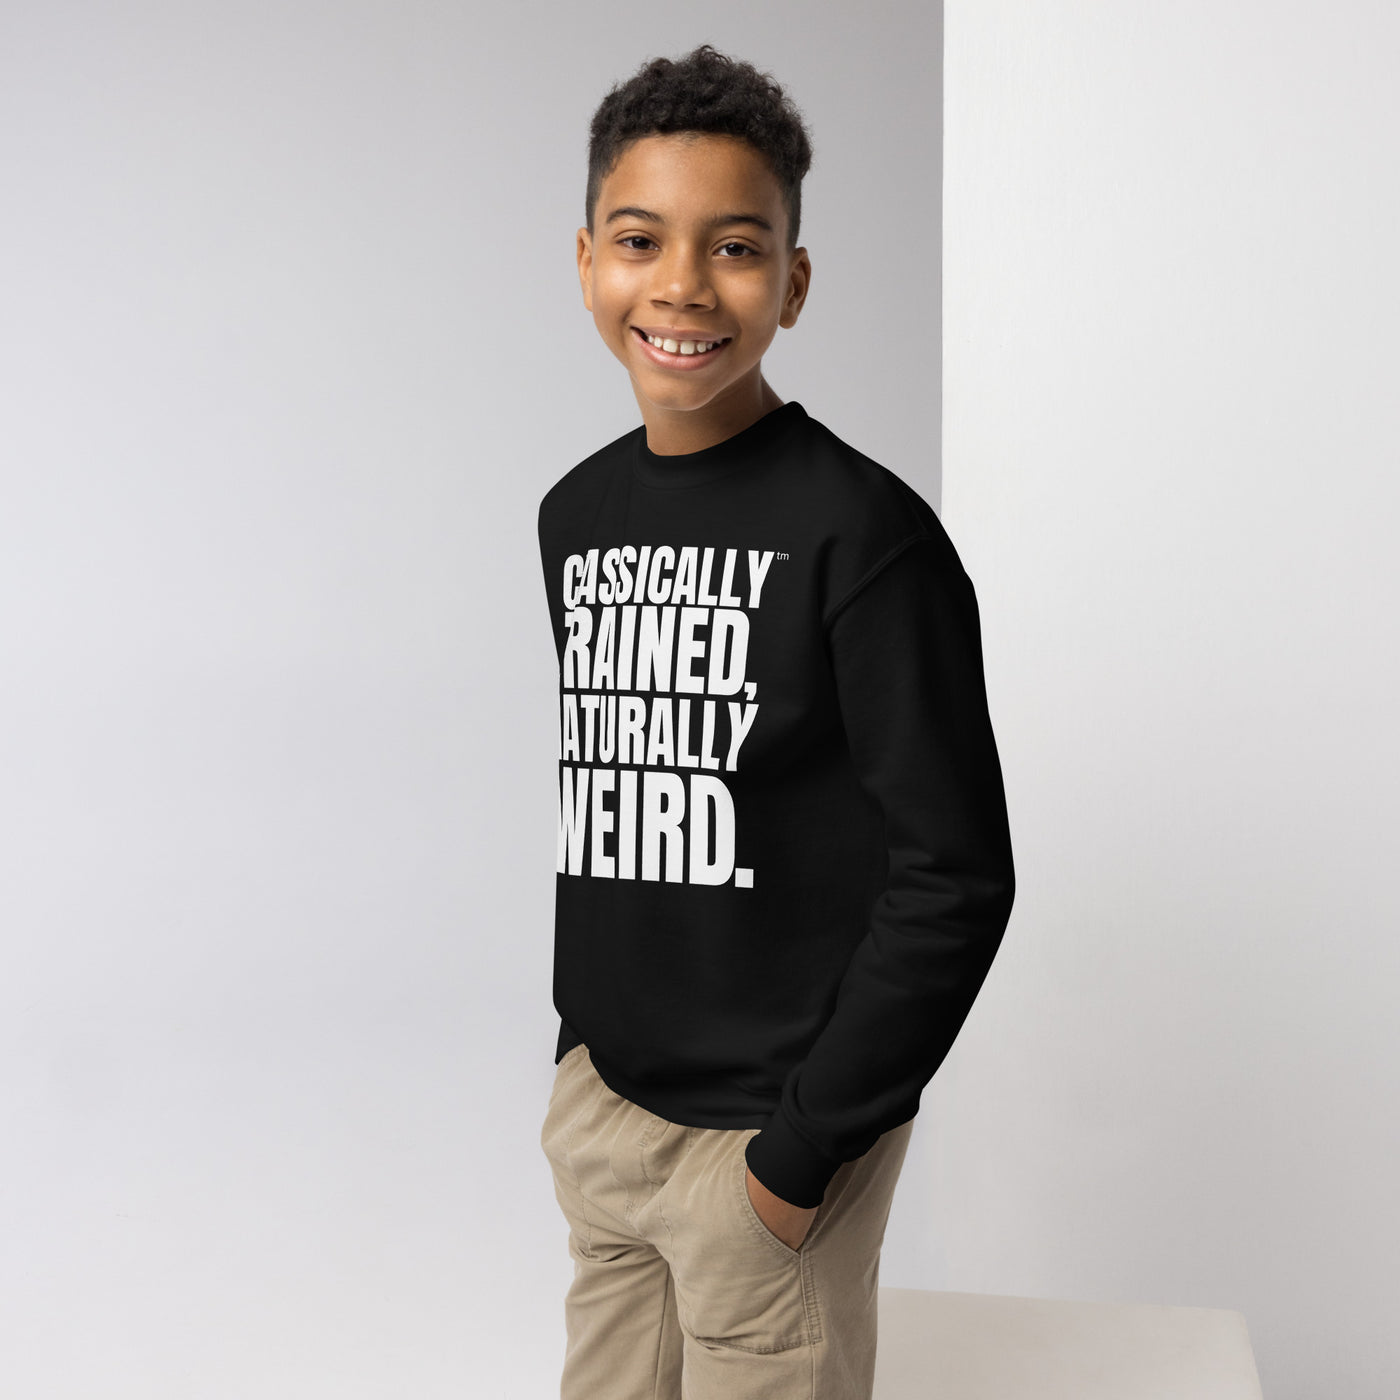 Classically Trained, Naturally Weird™ Sweatshirt - YOUTH